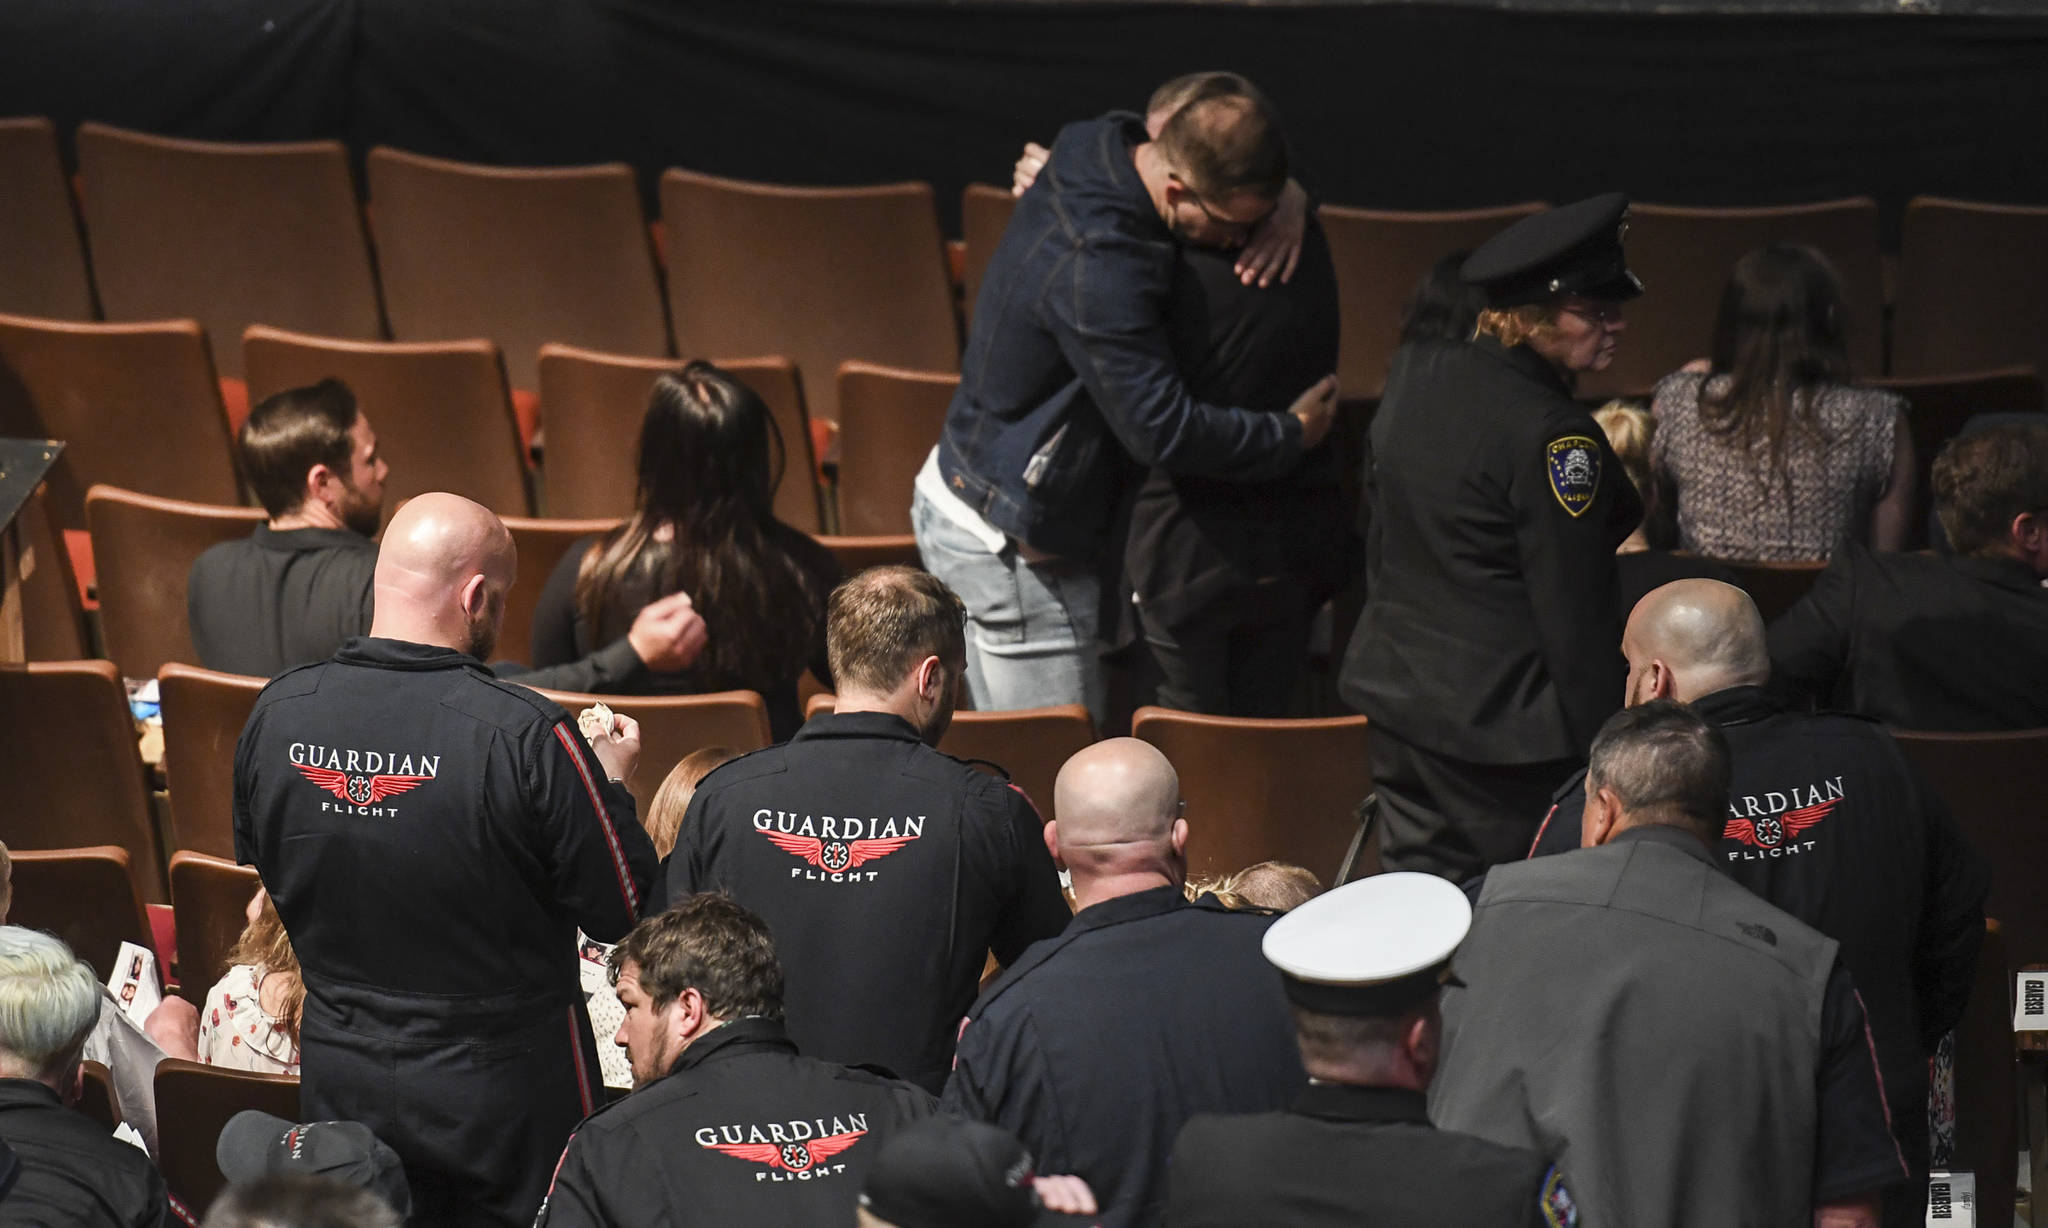 Family members embrace at the end of the a memorial service for the Guardian Flight crew held at Juneau-Douglas High School: Yadaa.at Kalé on Friday, June 7, 2019. (Michael Penn | Juneau Empire)